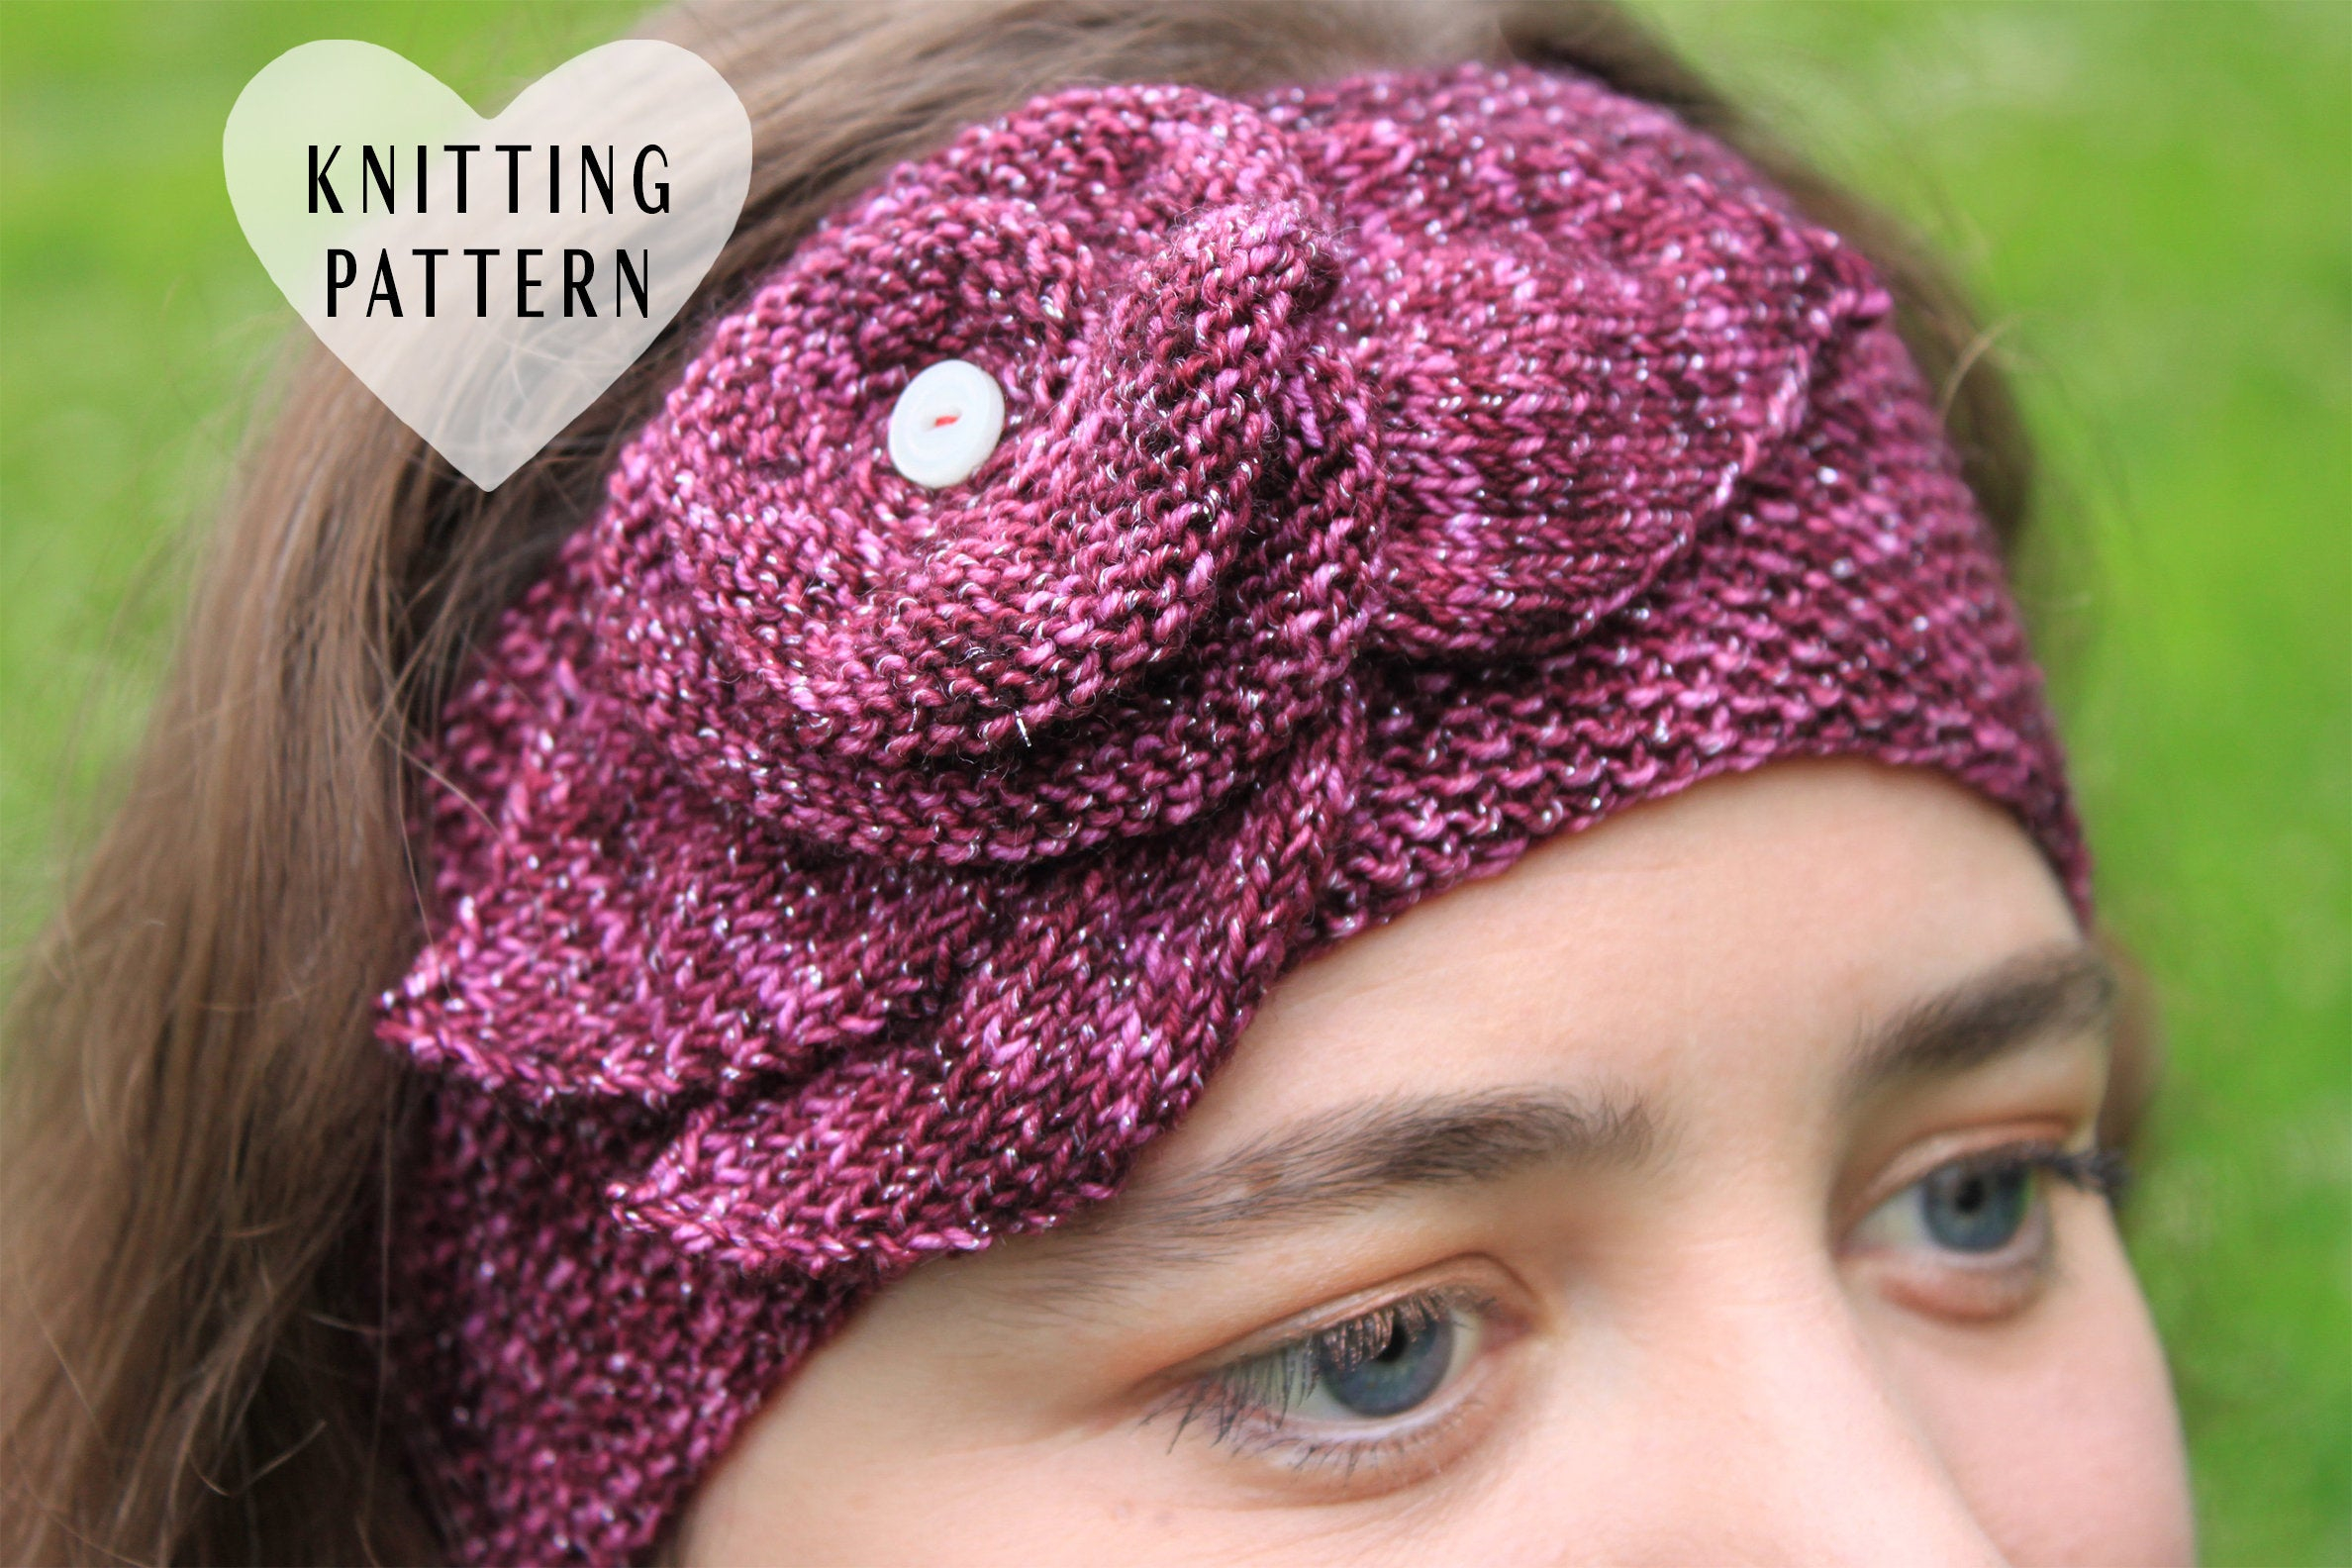 Knitted Headband Patterns With Flower Knitting Pattern Flower Headband Knitted Headband Moss Stitch Purple Headband Knitting Skills Knitting Master Class Knit